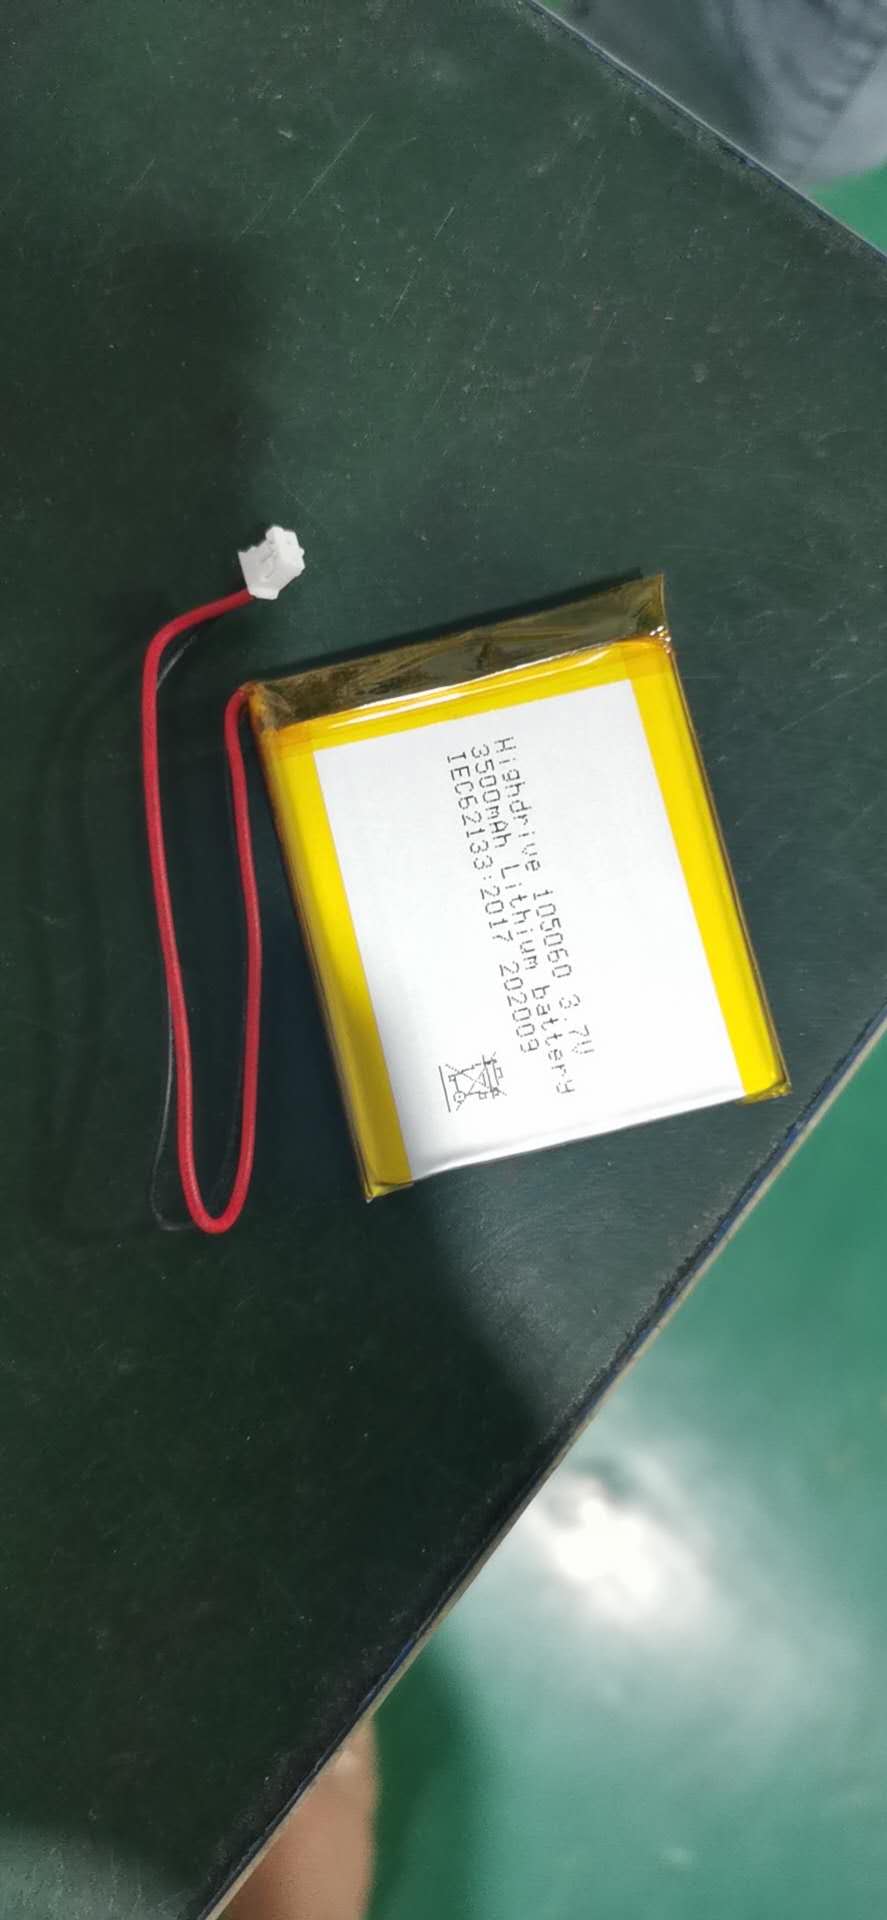 Highdrive battery  IEC62133 certificated 105060 3.7V 3500mAh rechargeable lipo battery for digital sensors data devices